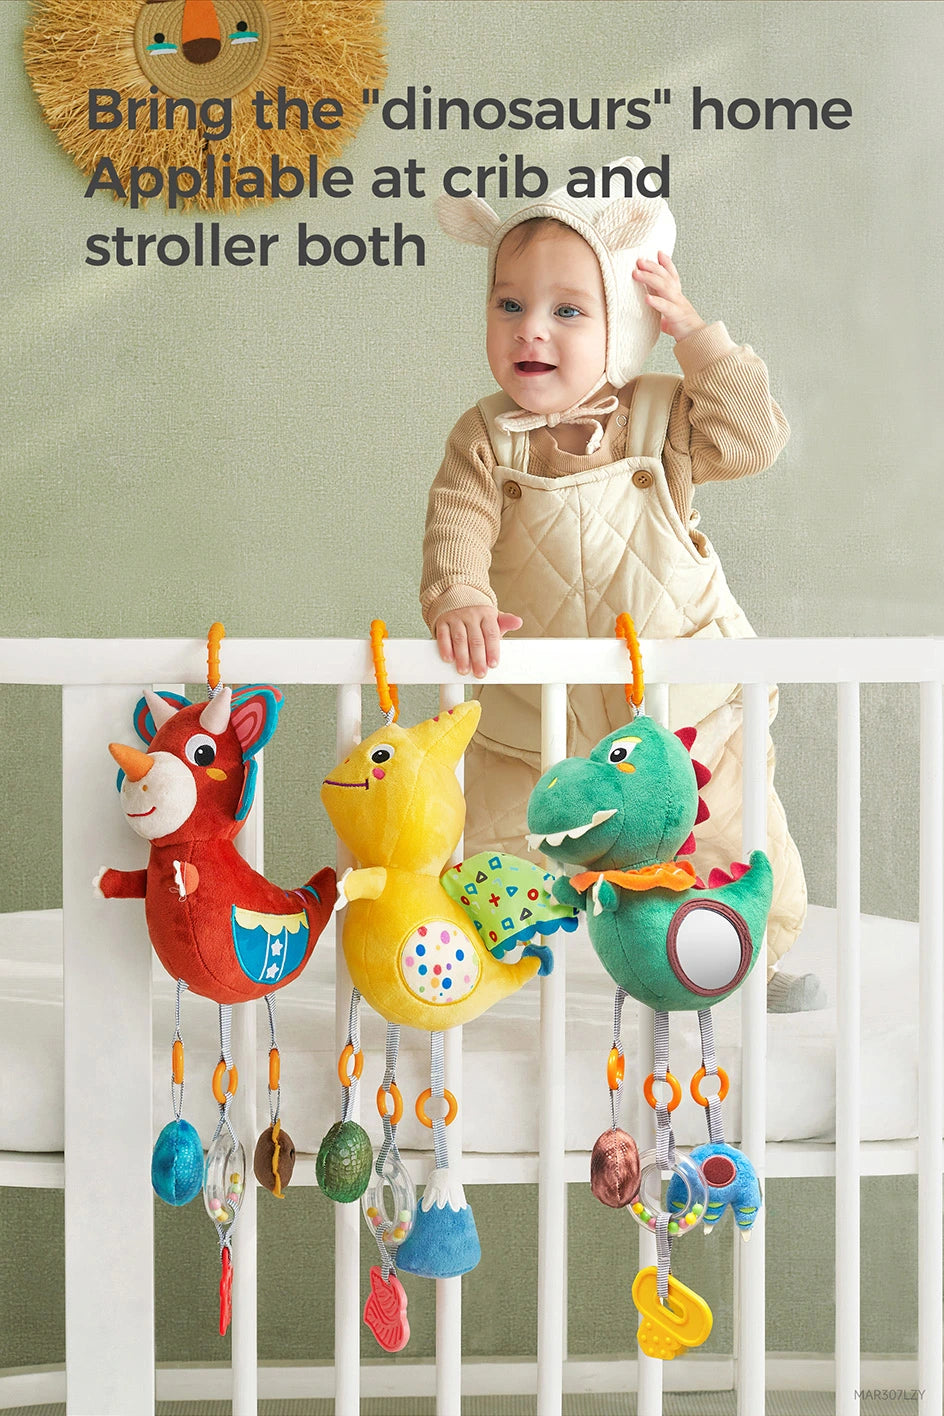 Car seat stroller mobile toy with hanging dinosaur rattle